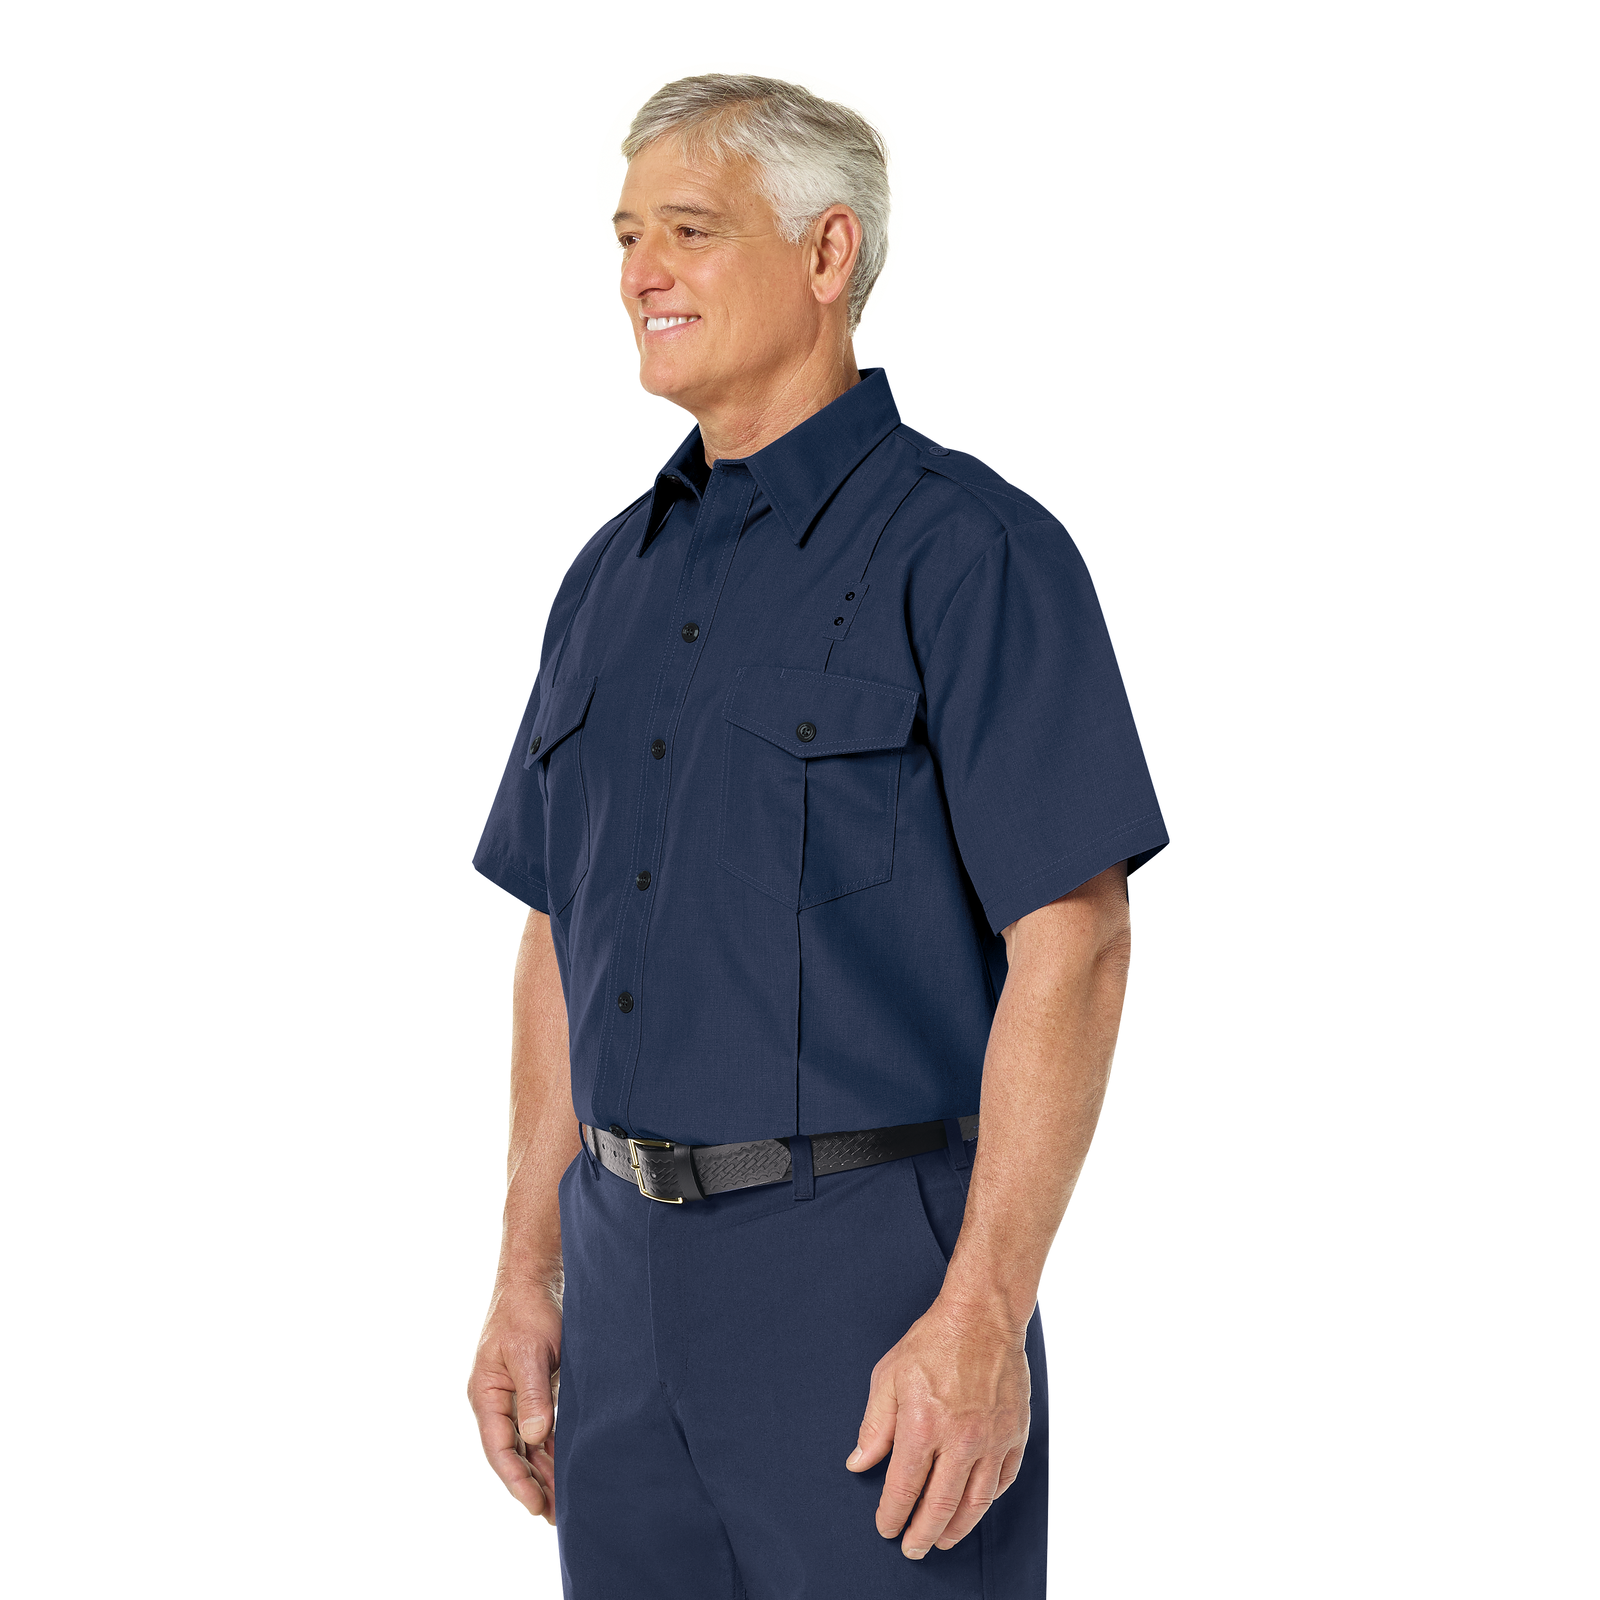 Workrite Classic Short Sleeve Fire Chief Shirt (FSC2) | Fire Store | Fuego Fire Center | Firefighter Gear | Made with durable, flame-resistant Nomex® IIIA fabric and autoclaved using our proprietary PerfectPress® process to give you a professional appearance that lasts. Featuring details like lined, banded collars and reinforced stitching, designed to support your needs.